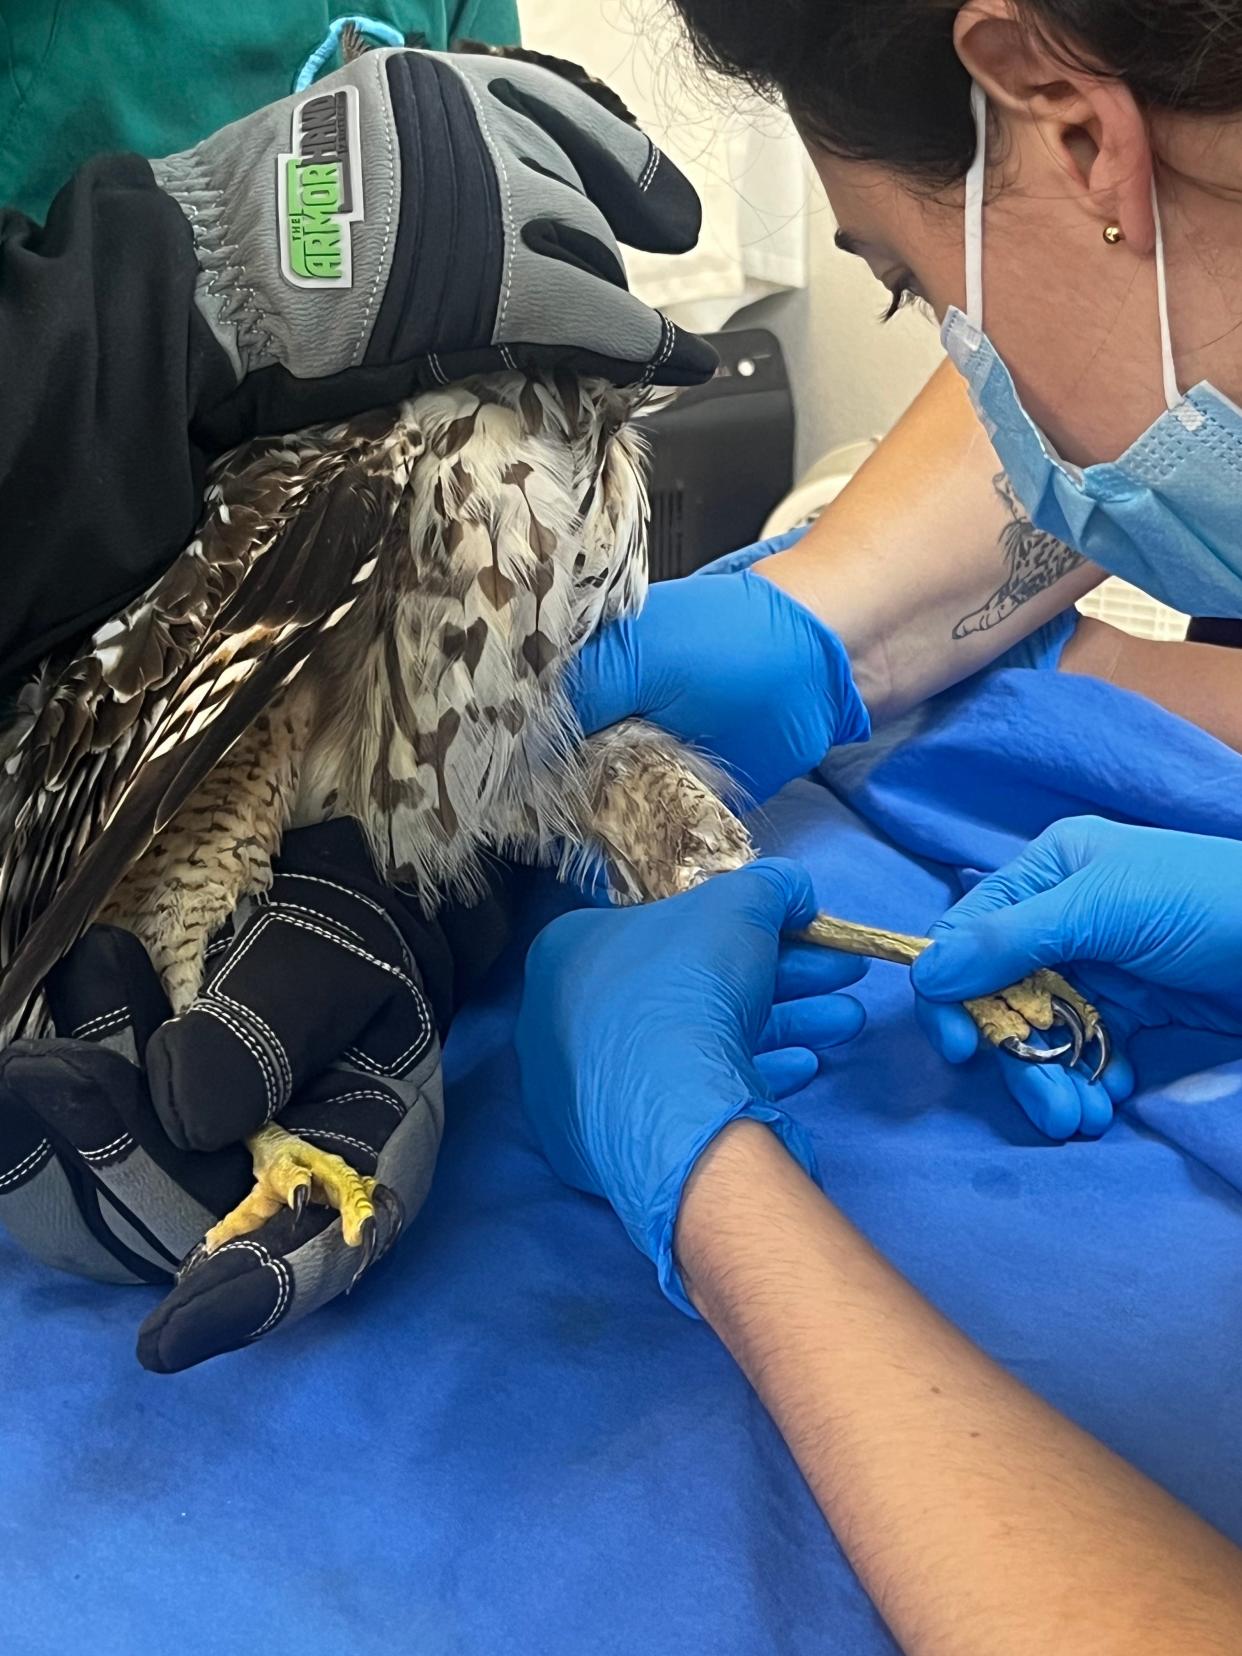 Dr. Maria Passarelli, a veterinarian for Save our Seabirds, treats a red-tailed hawk for suspected rodenticide poisoning.